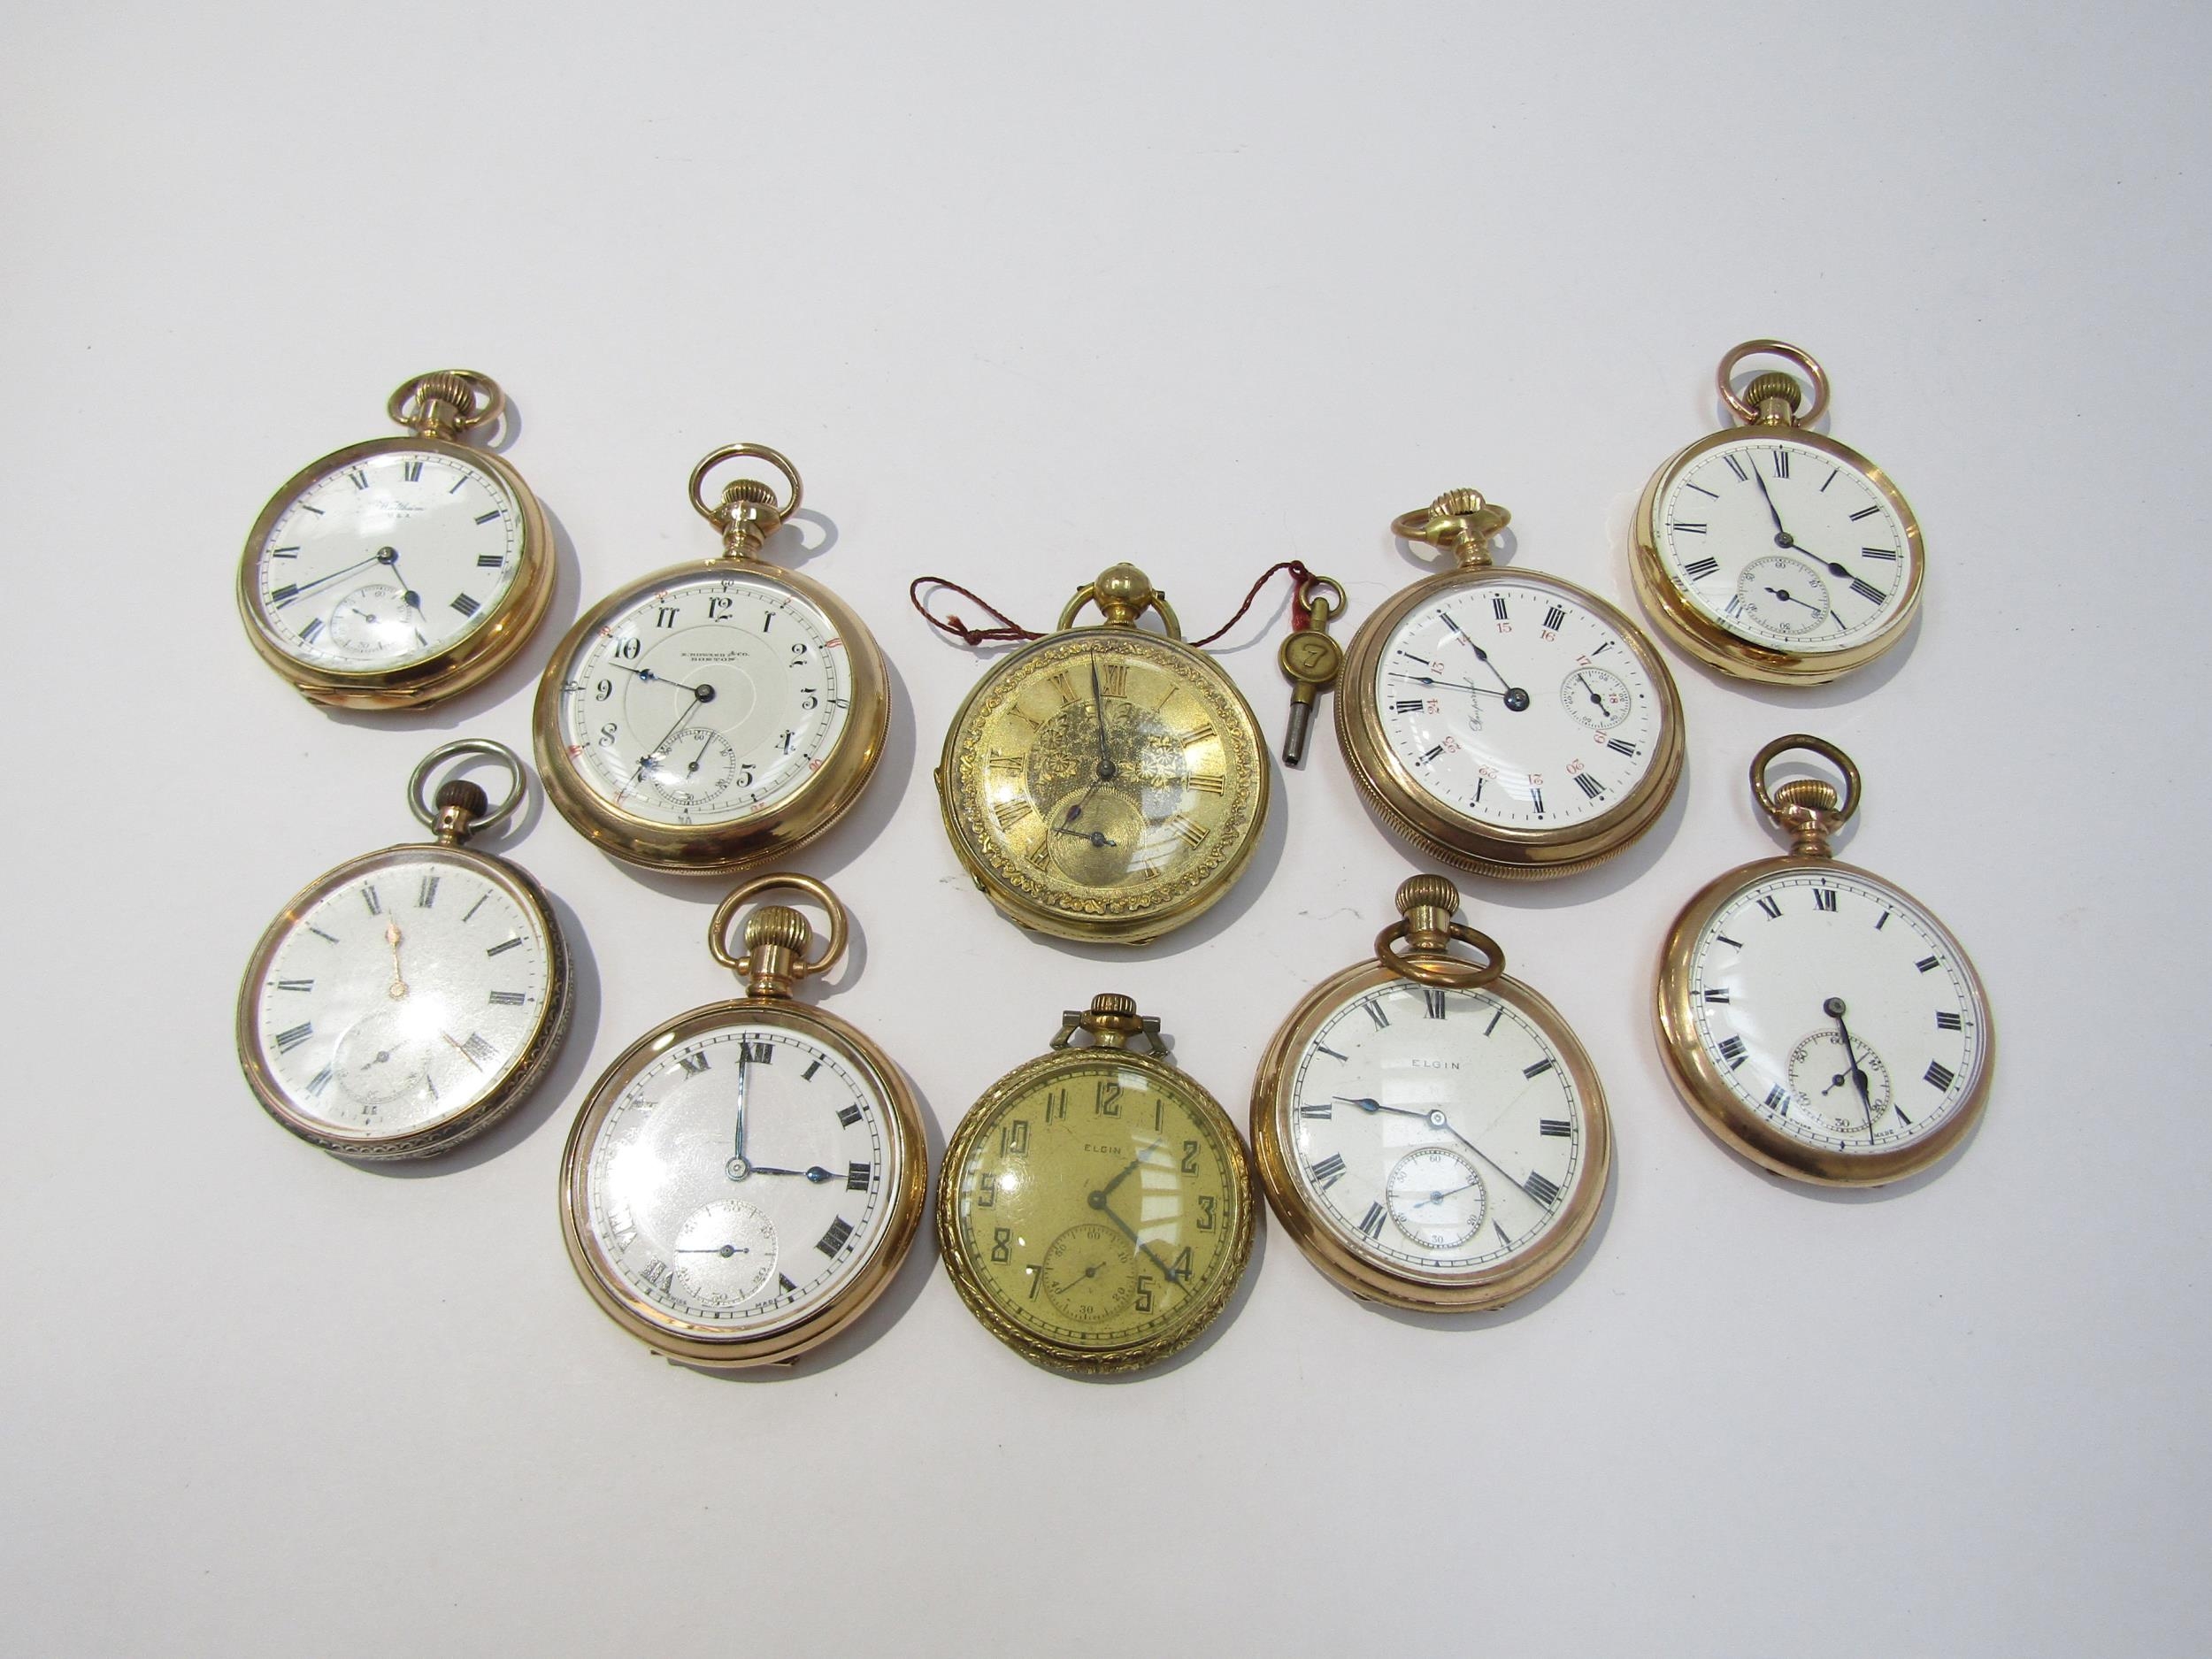 Nine assorted gold plated open faced pocket watches, including American, English and Waltham